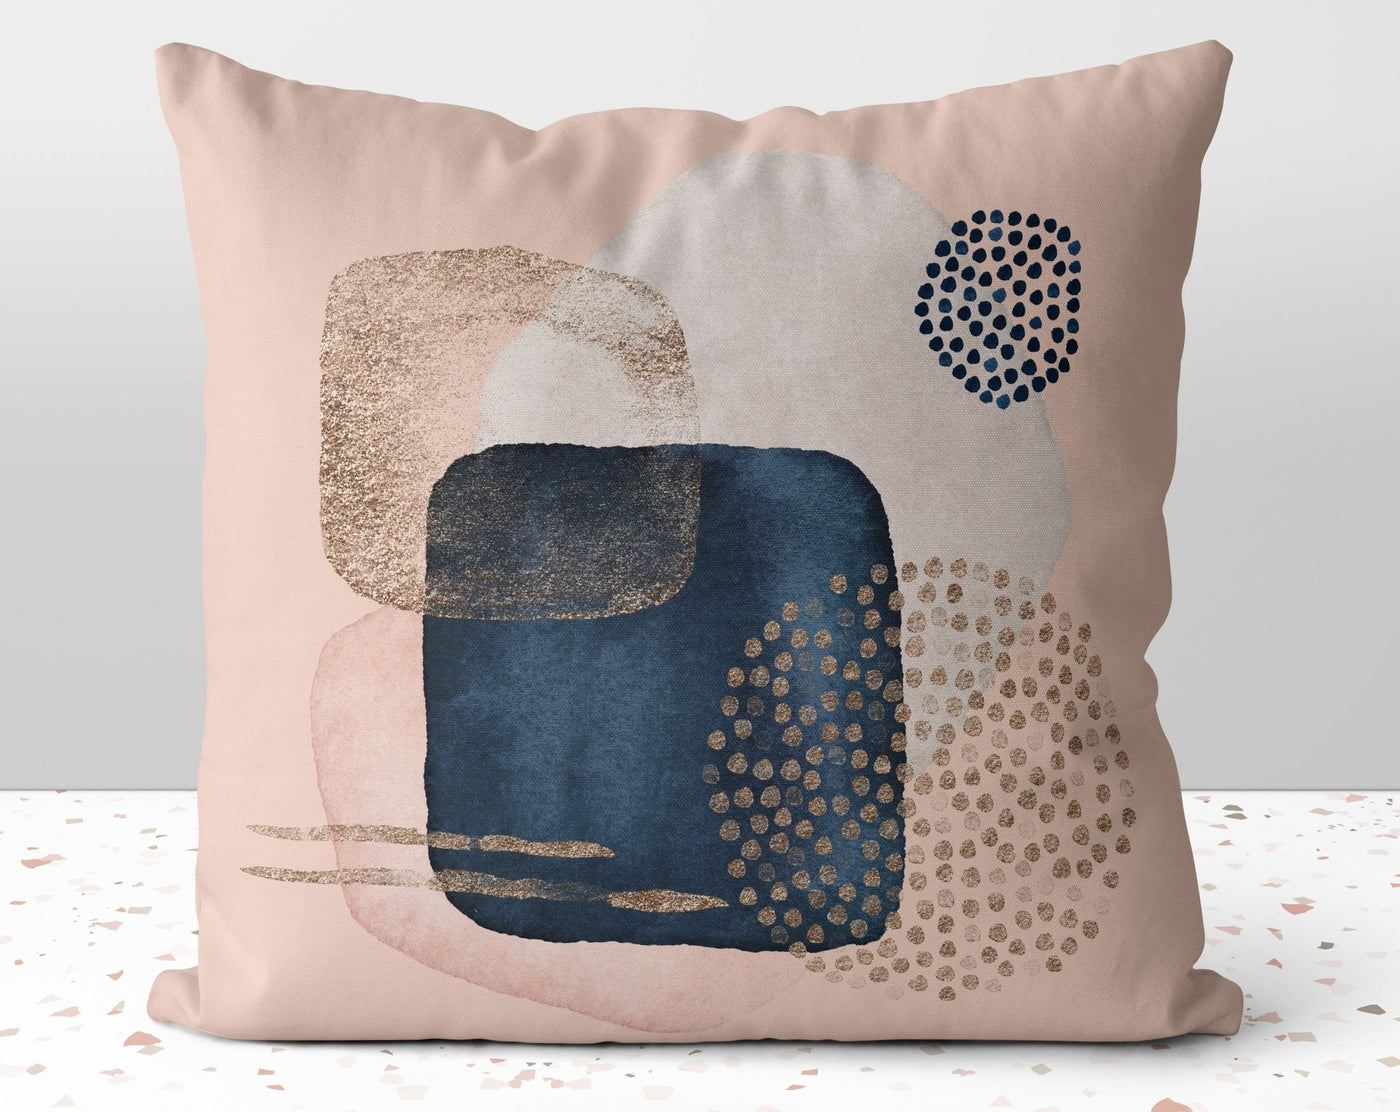 Modern Glam Dots Shapes Pink Square Pillow with Blue and Gold Printed Accents with Cover Throw with Insert - Cush Potato Pillows